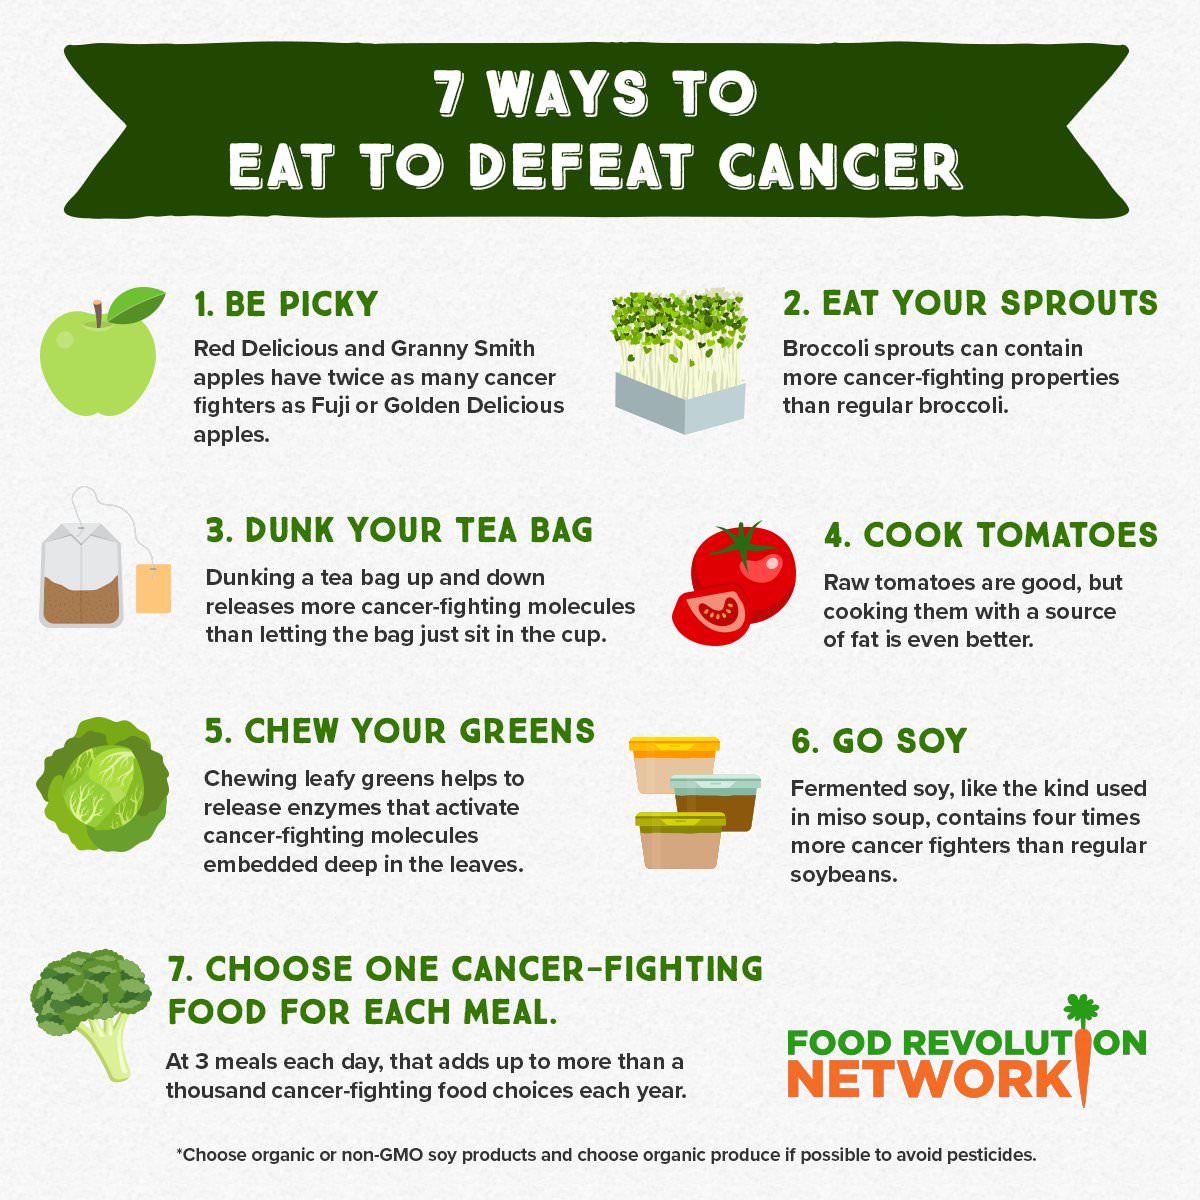 Eat to Defeat Cancer infographic from Food Revolution Network